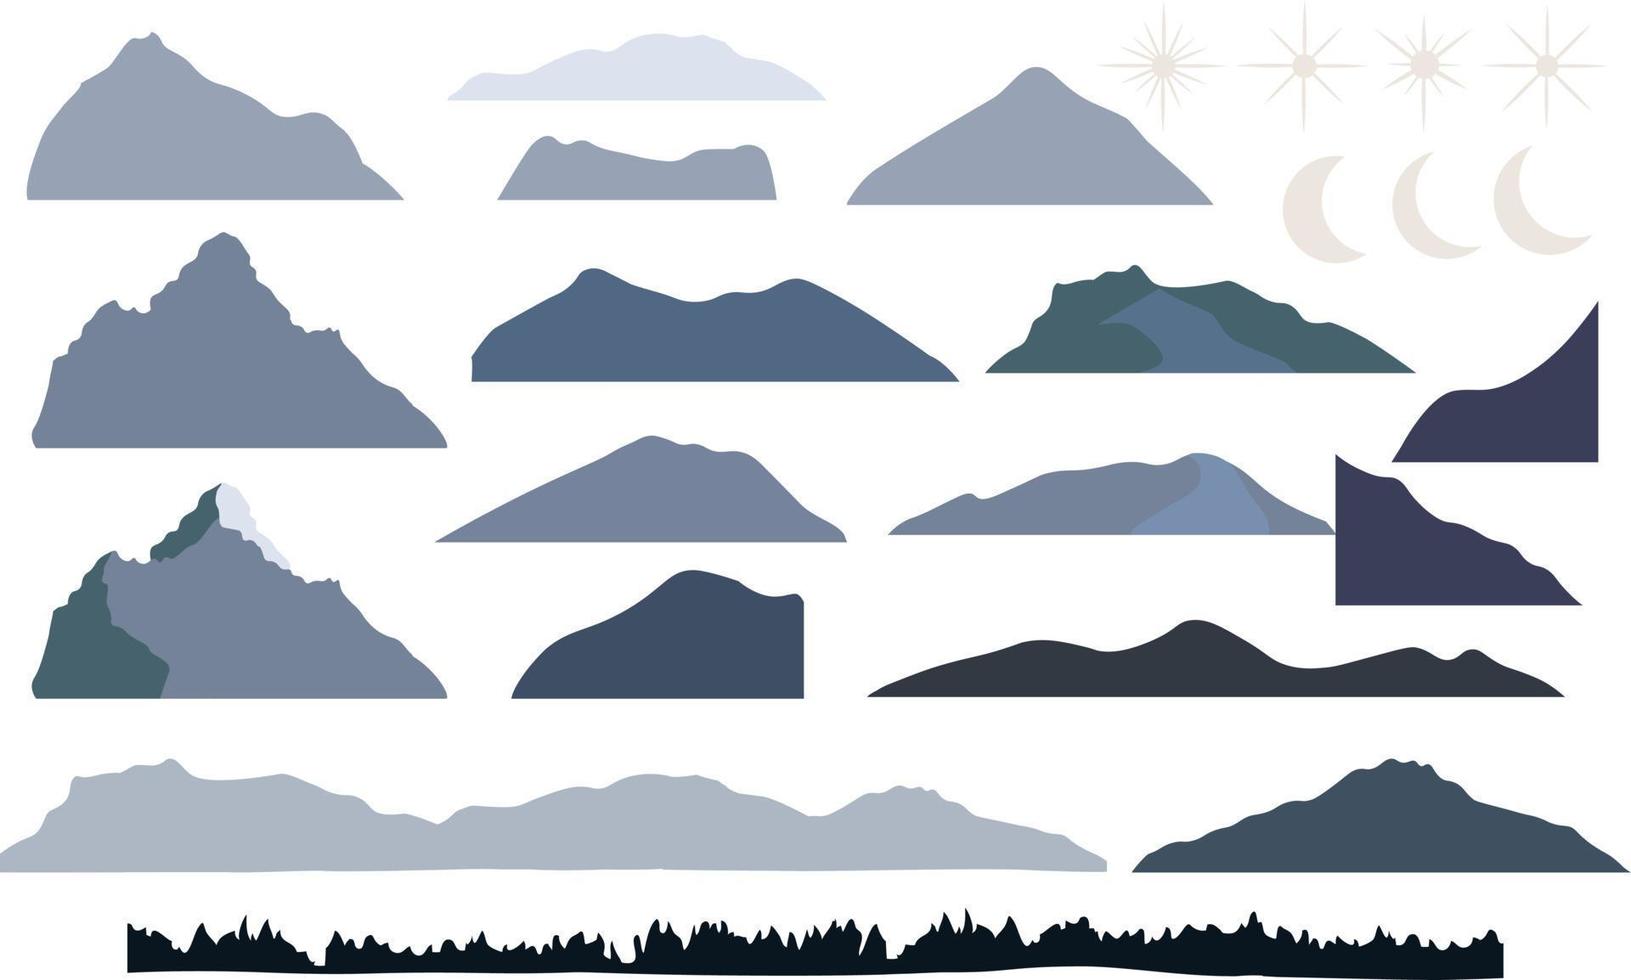 The Mountains Abstract Landscape elements vector